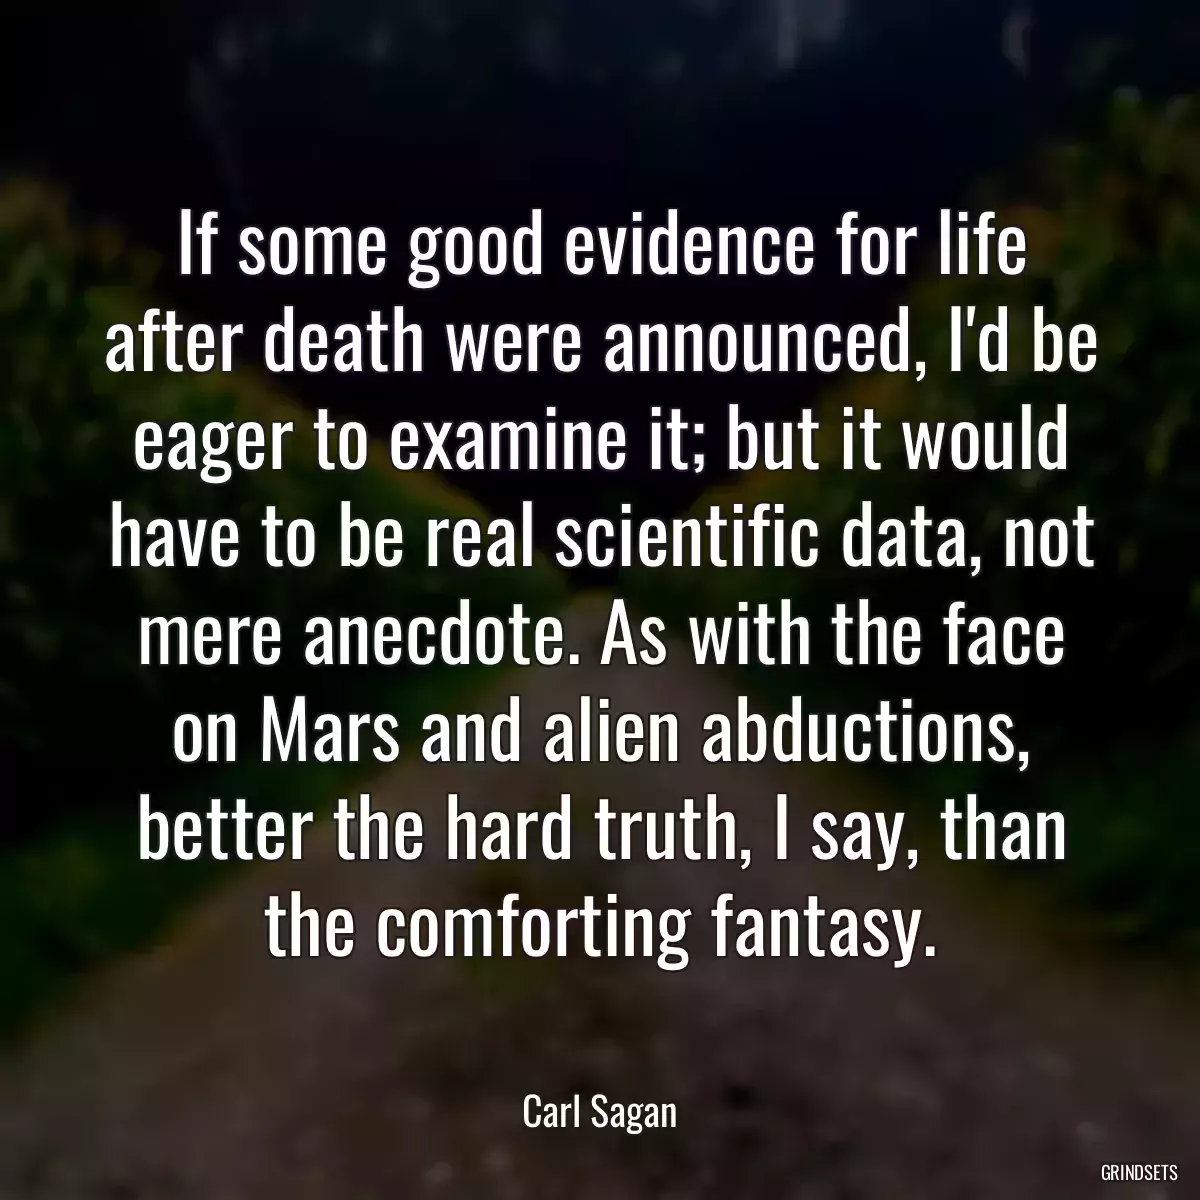 If some good evidence for life after death were announced, I\'d be eager to examine it; but it would have to be real scientific data, not mere anecdote. As with the face on Mars and alien abductions, better the hard truth, I say, than the comforting fantasy.